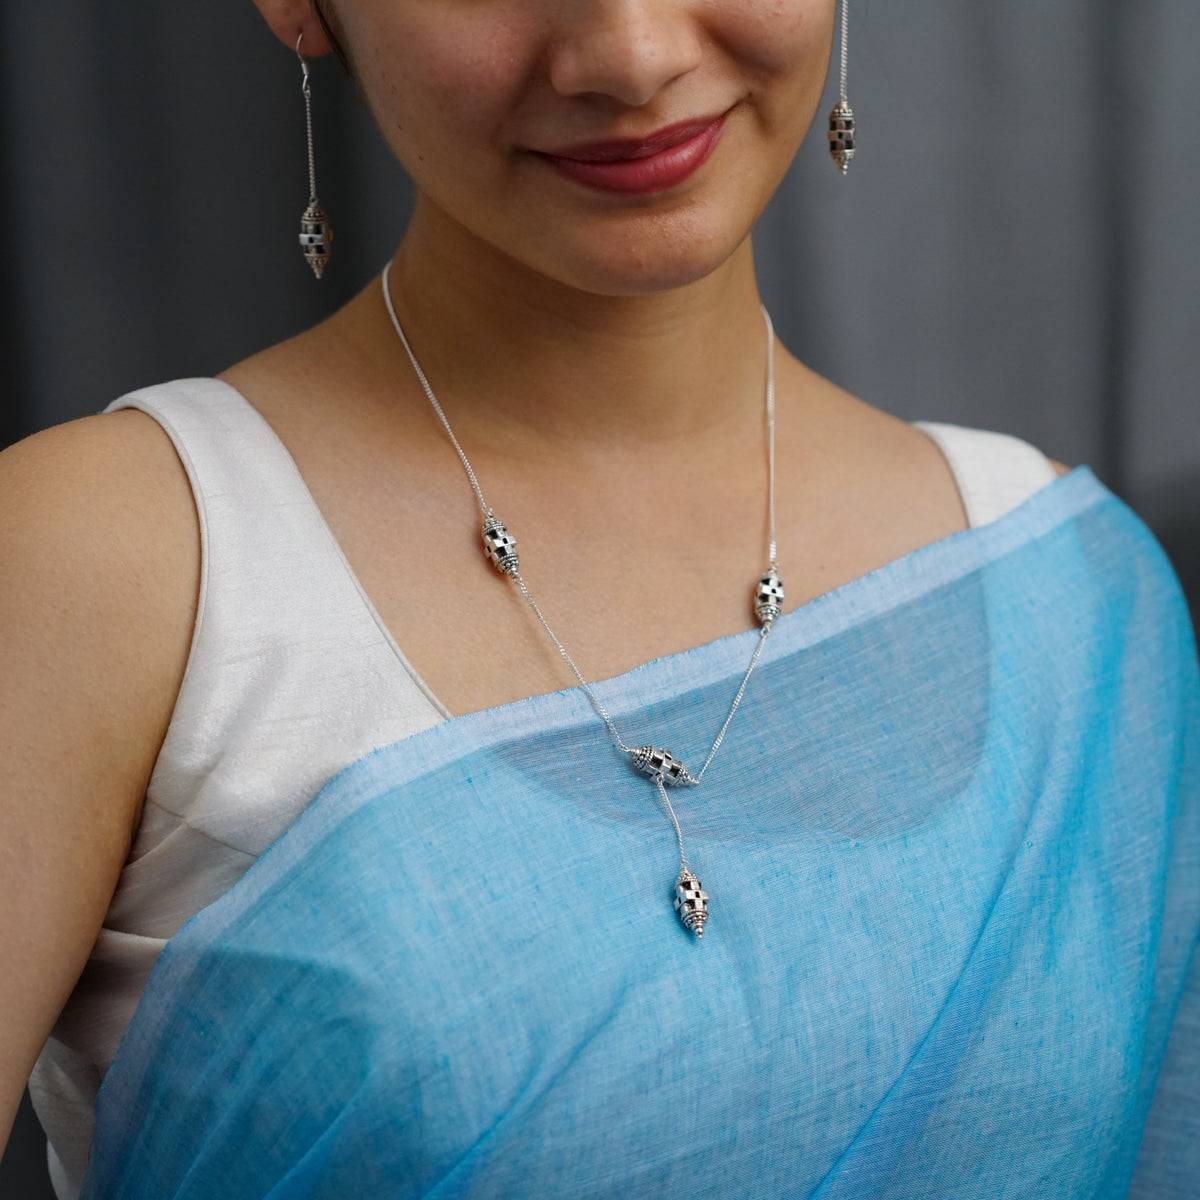 a woman wearing a blue and white sari